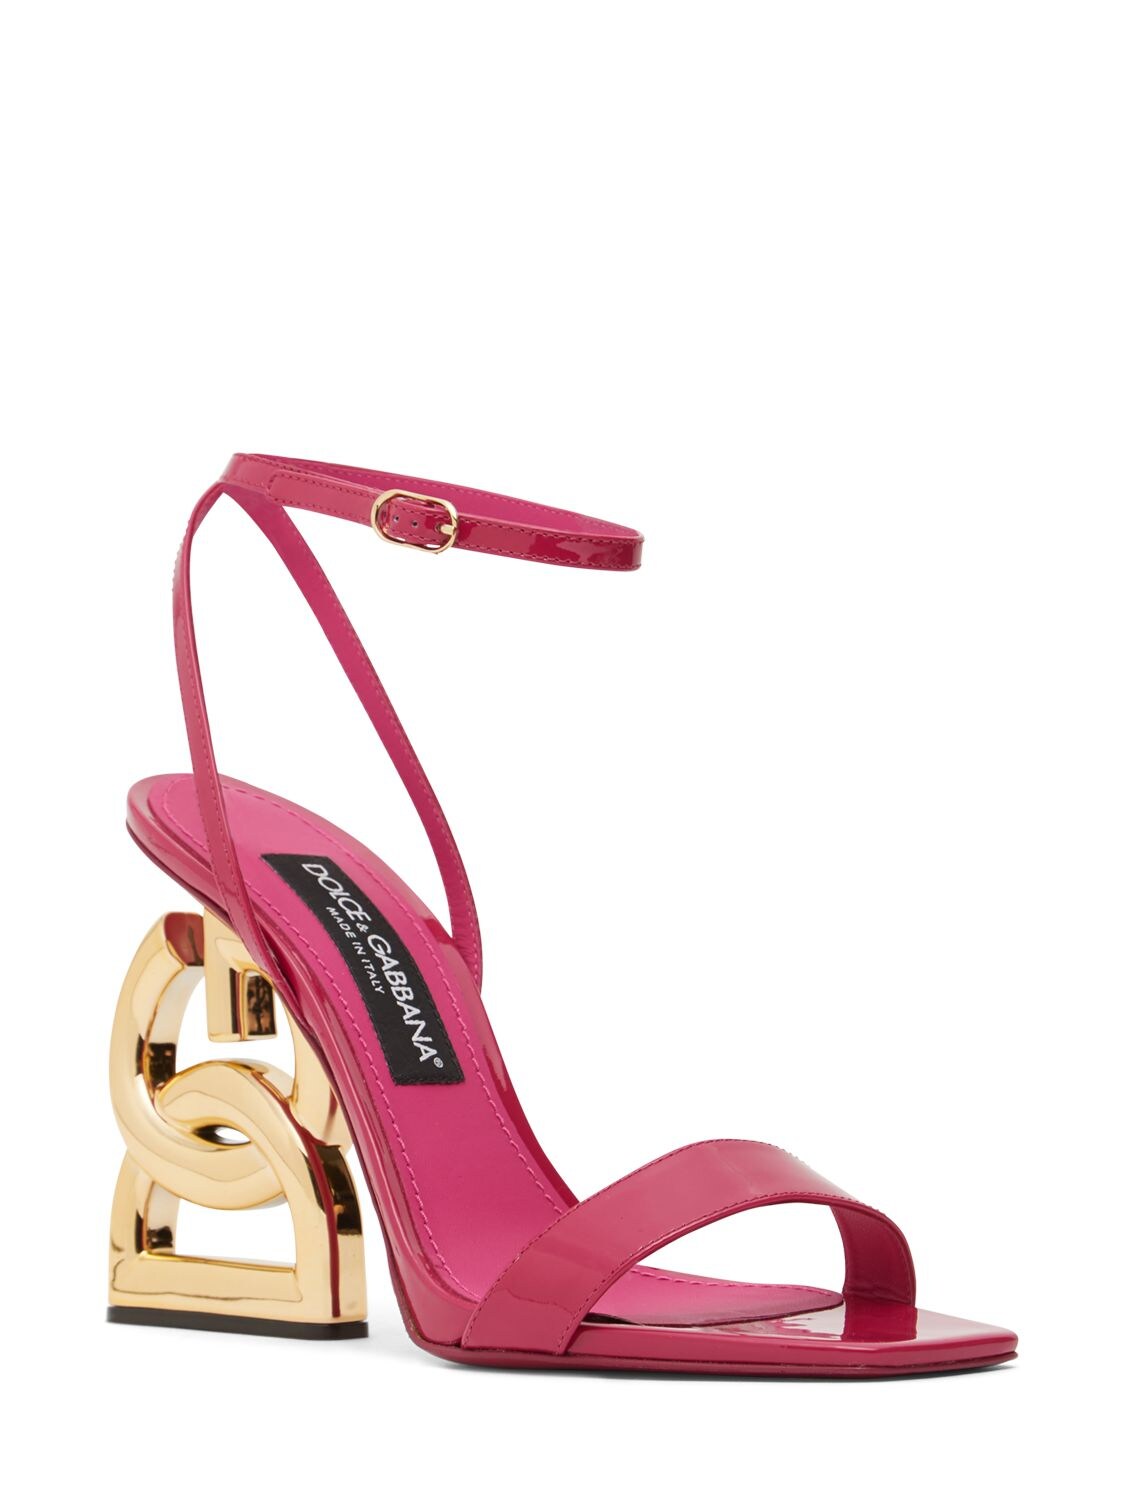 Shop Dolce & Gabbana 105mm Keira Patent Leather Sandals In Fuchsia